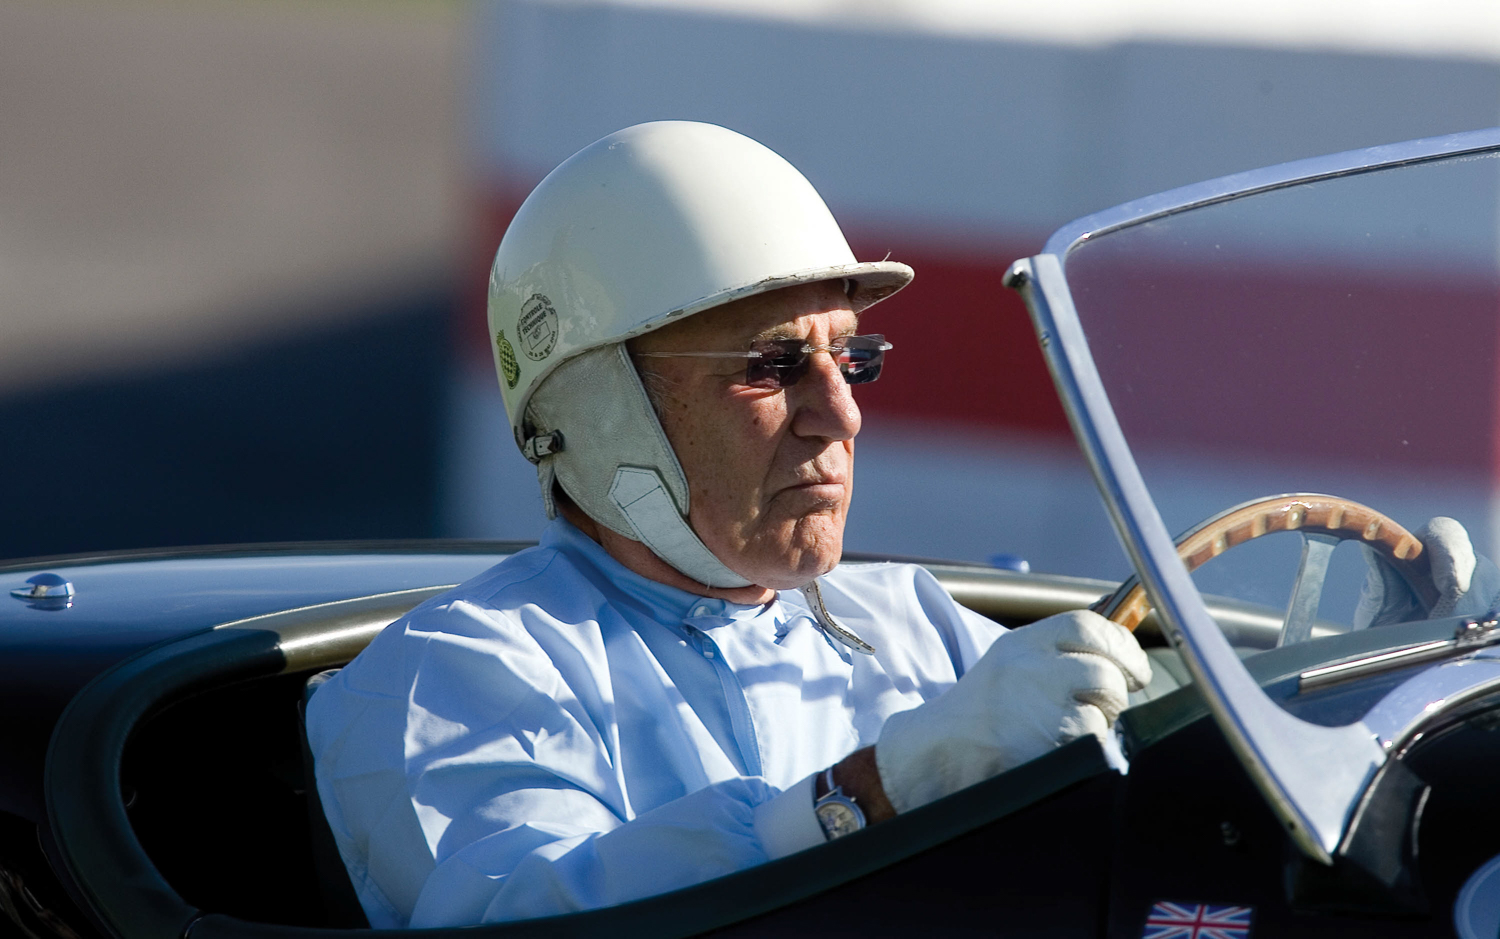 Goodwood Revival - Sir Stirling Moss 